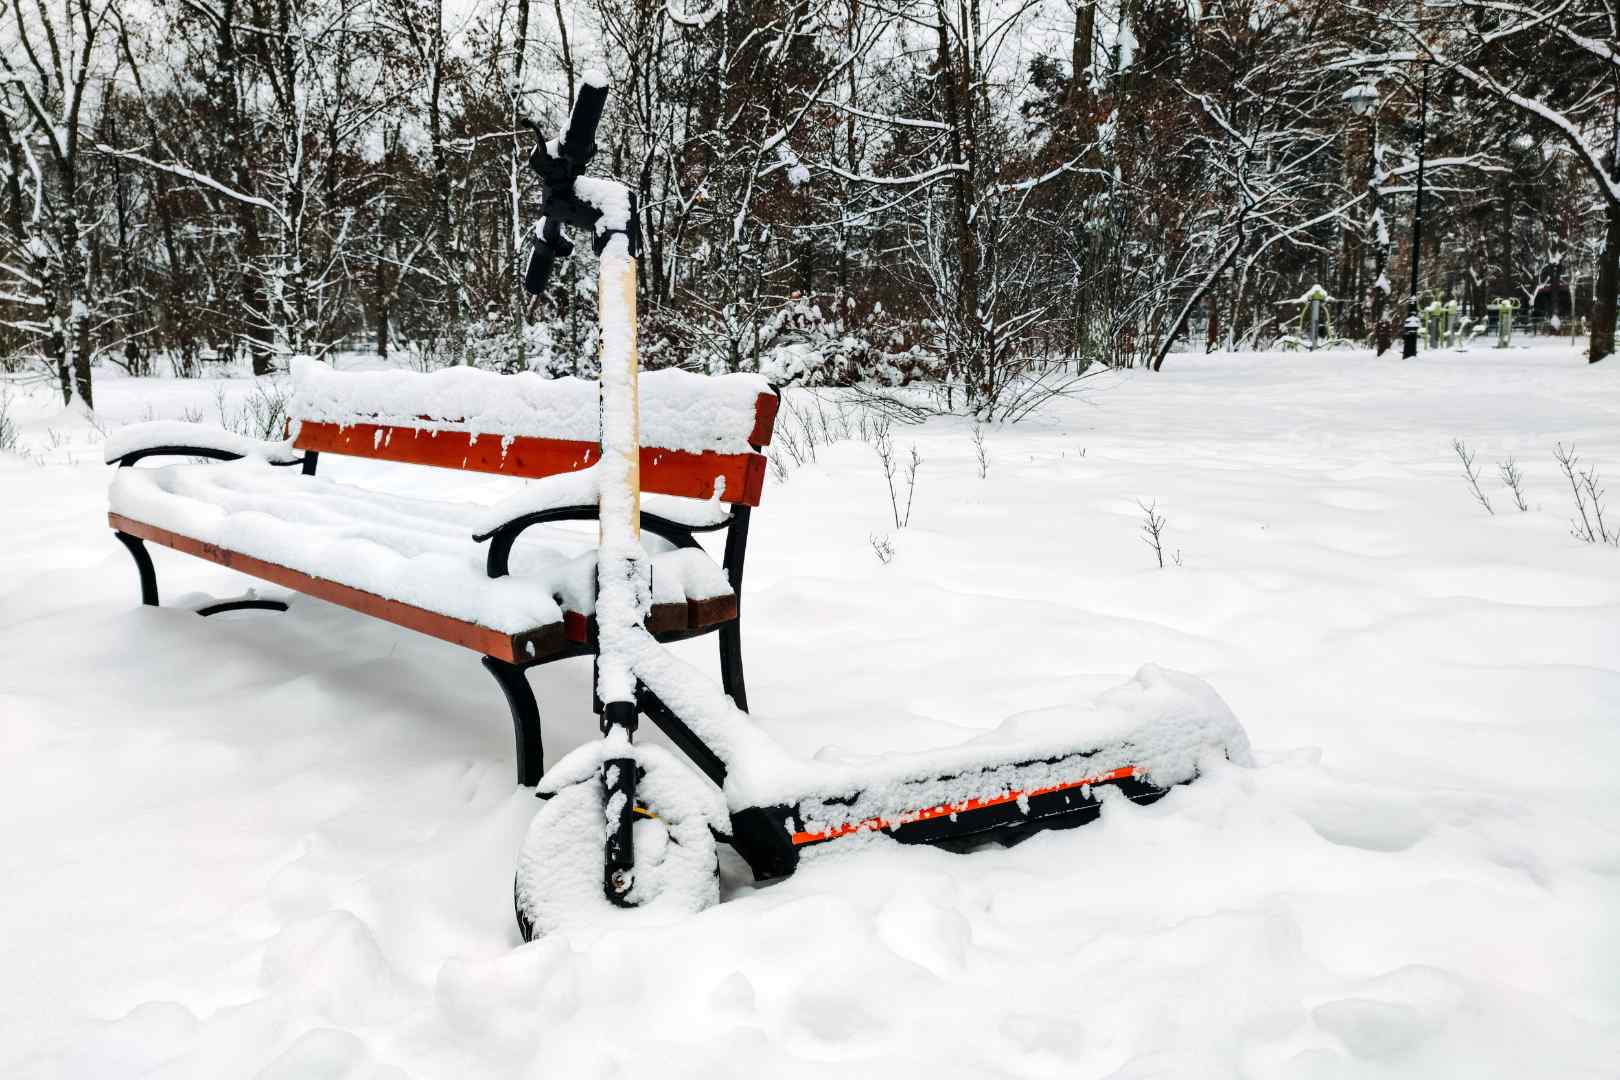 scooter on snow image